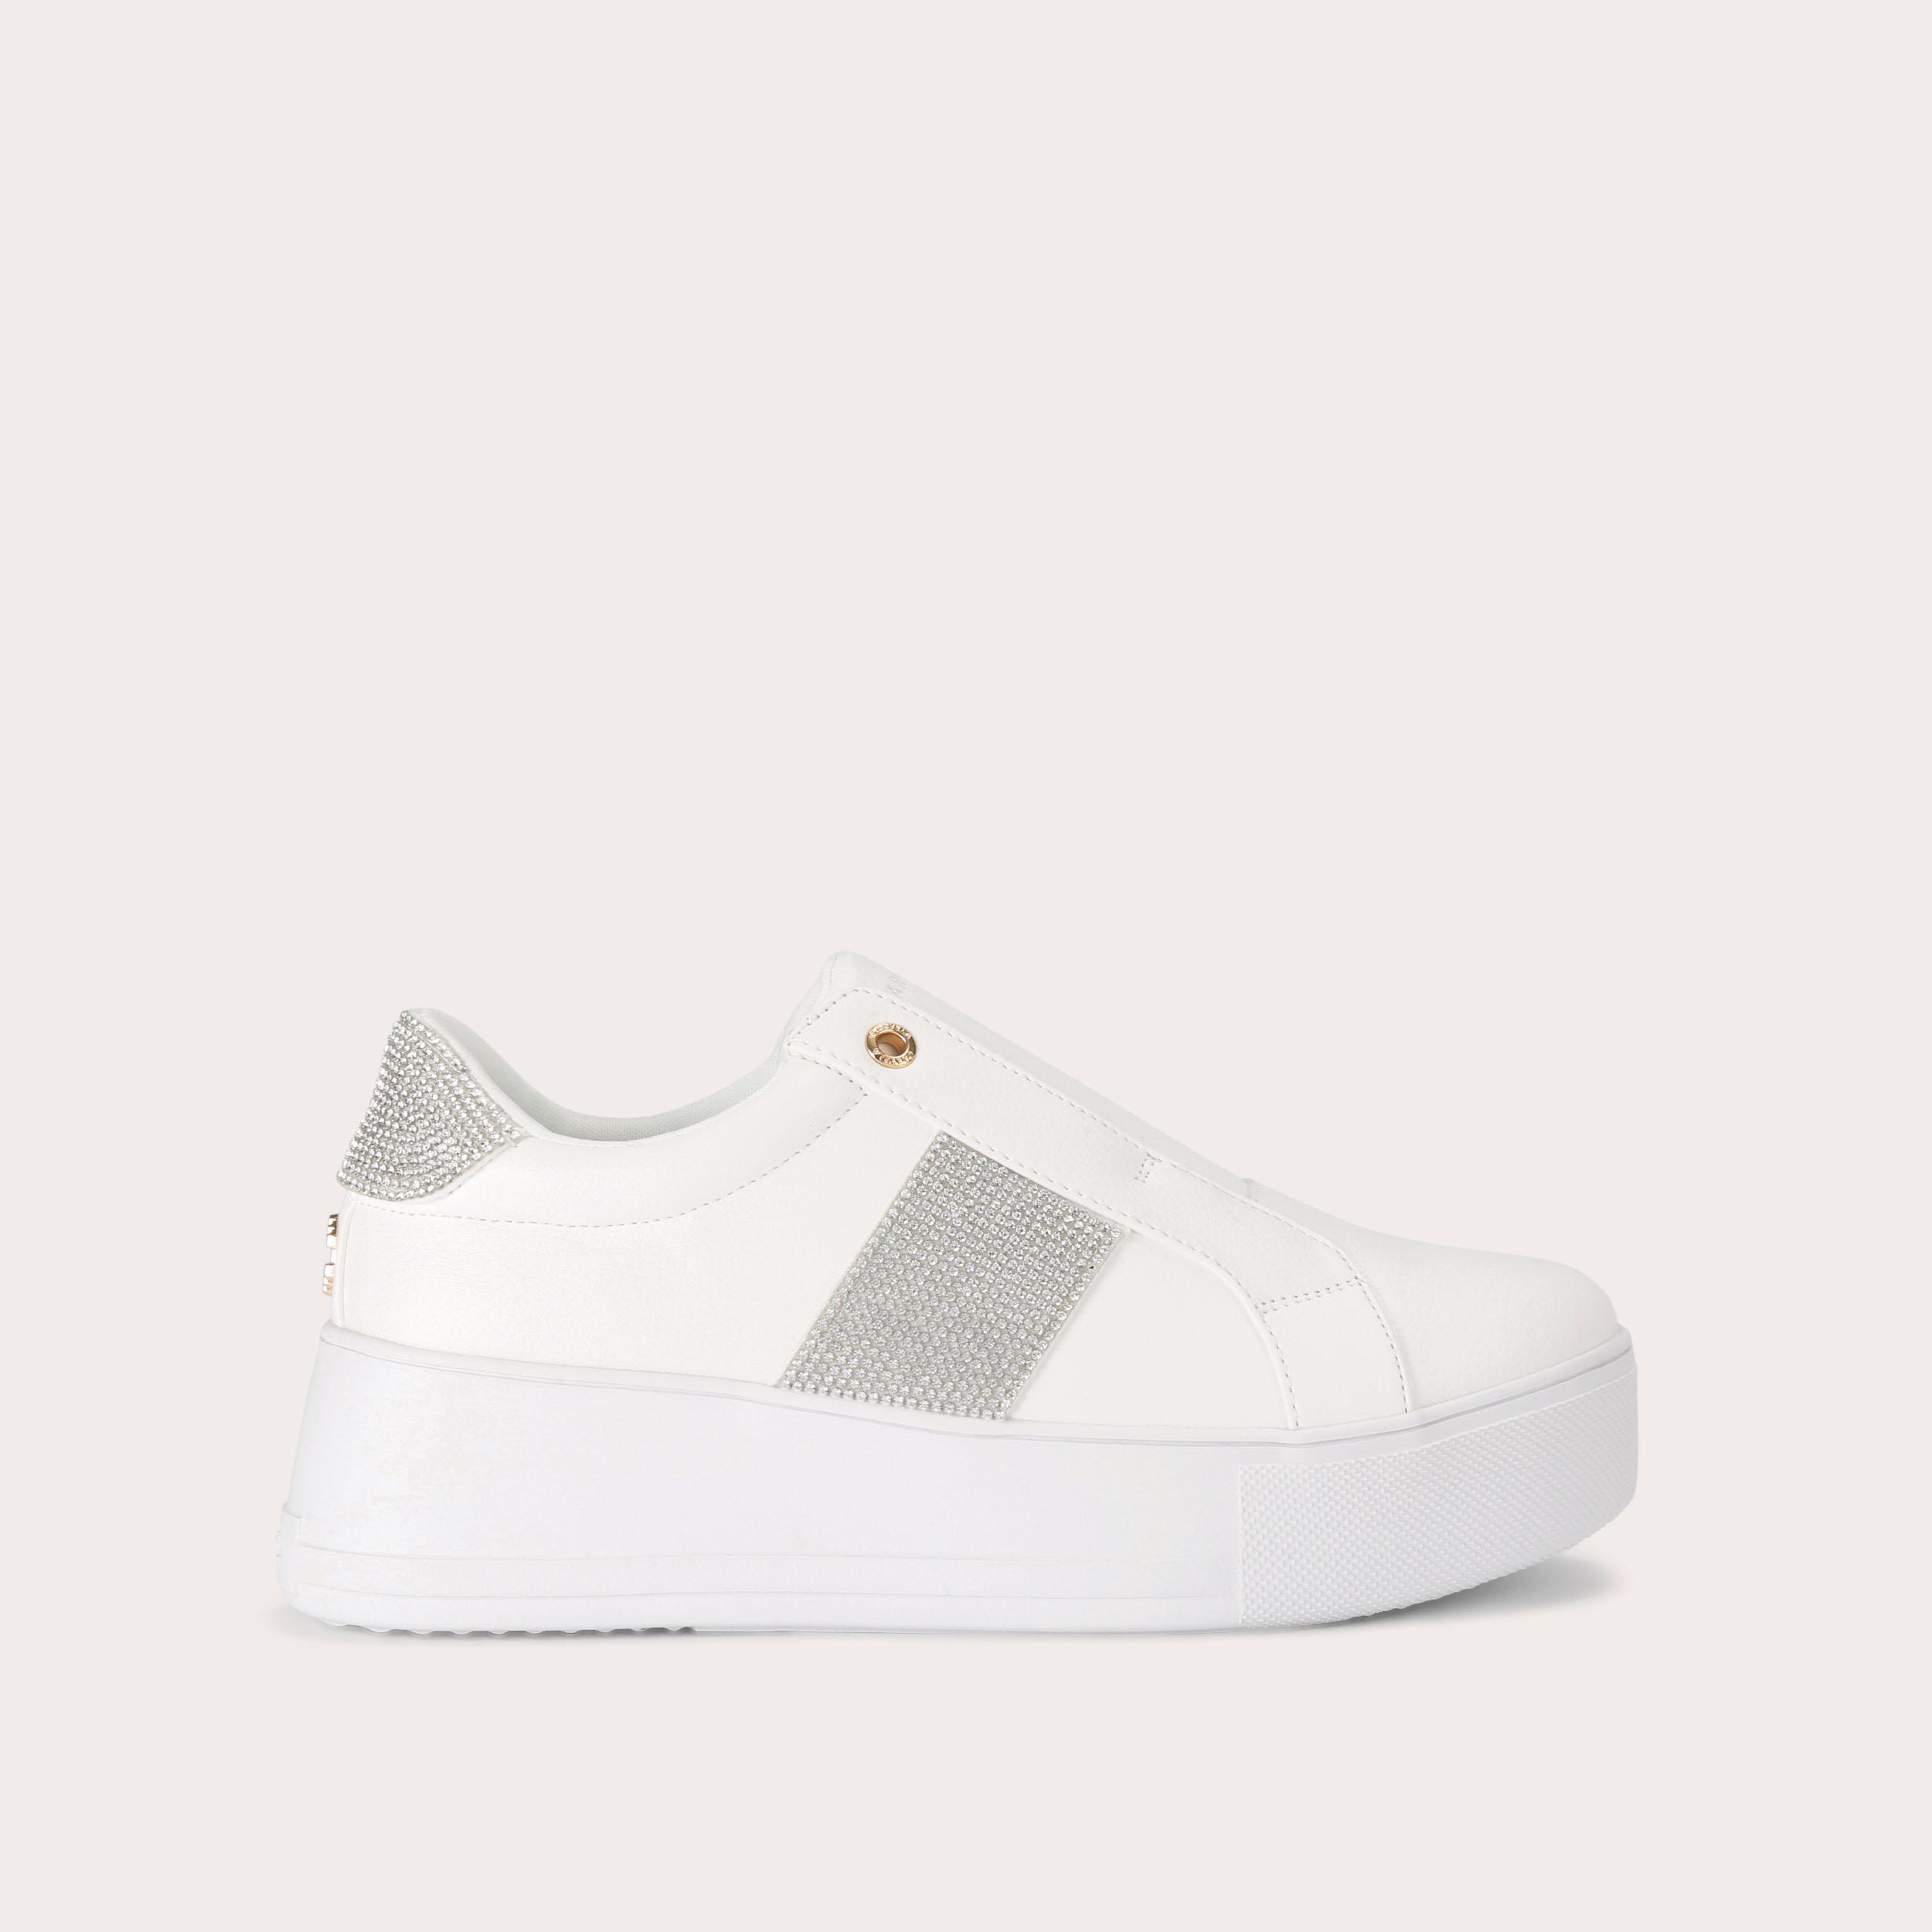 JIVE LACELESS 2 White Silver Jewel Trainer by CARVELA